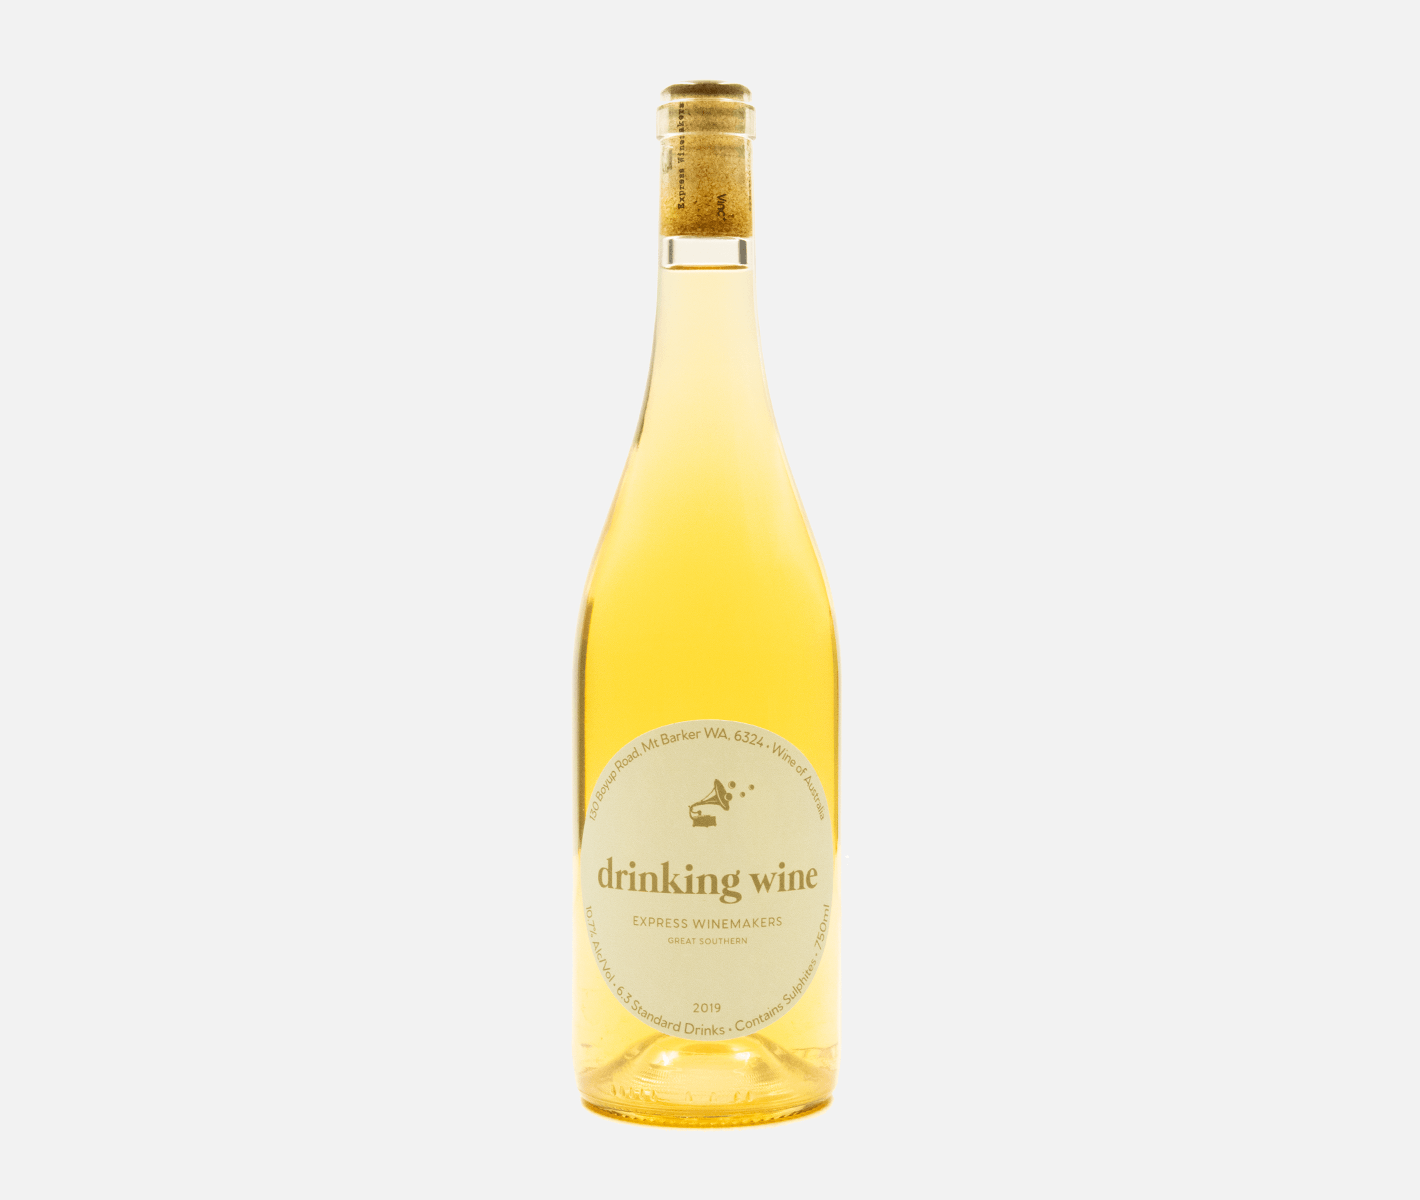 2019 Express Winemakers Drinking Wine White - DRNKS